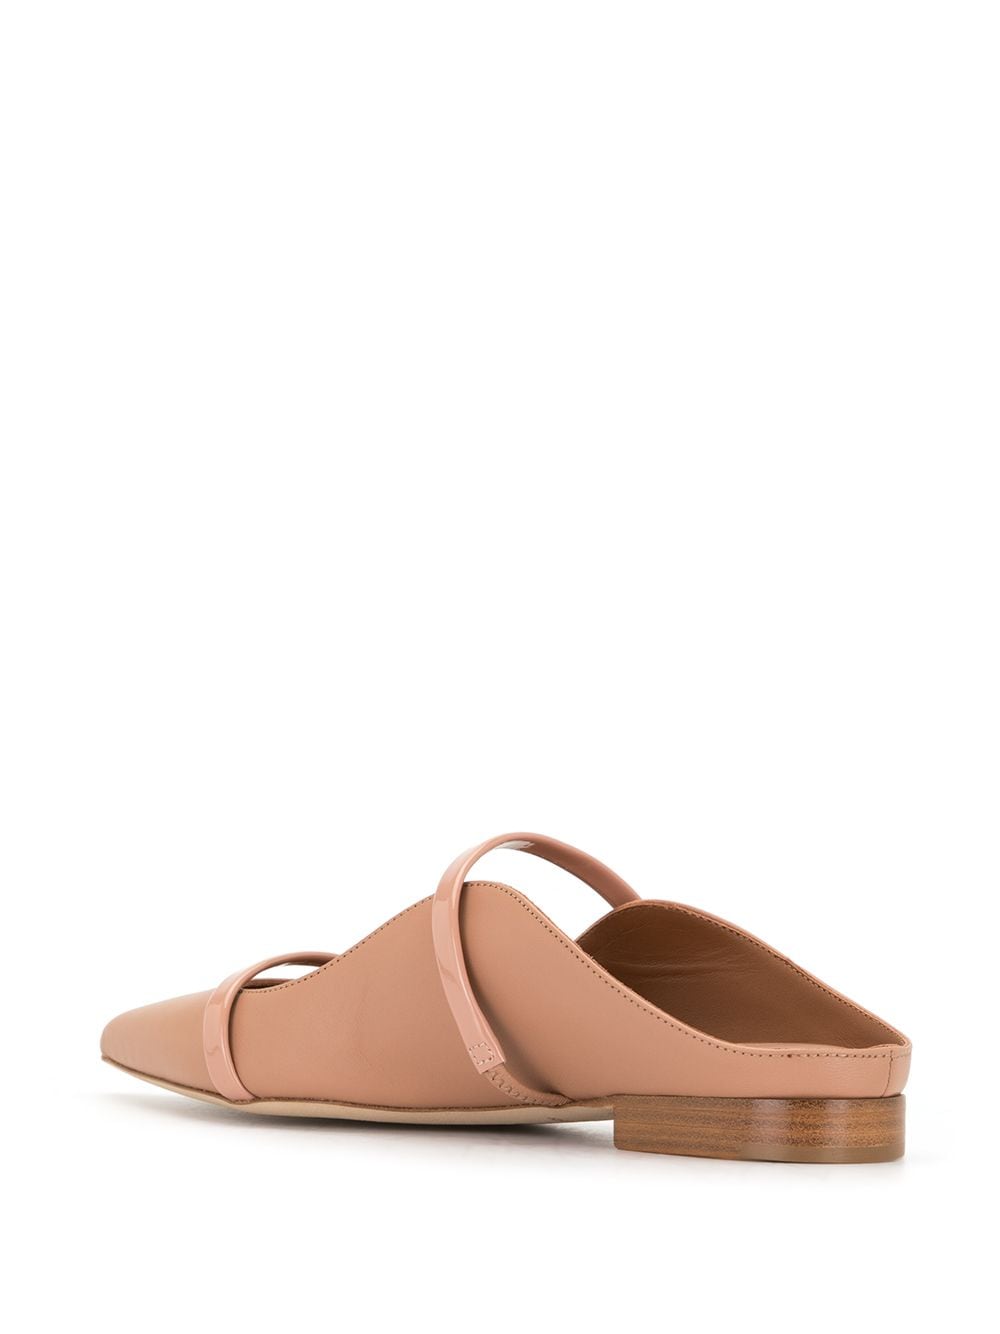 malone souliers maureen strappy ballerinas - pink